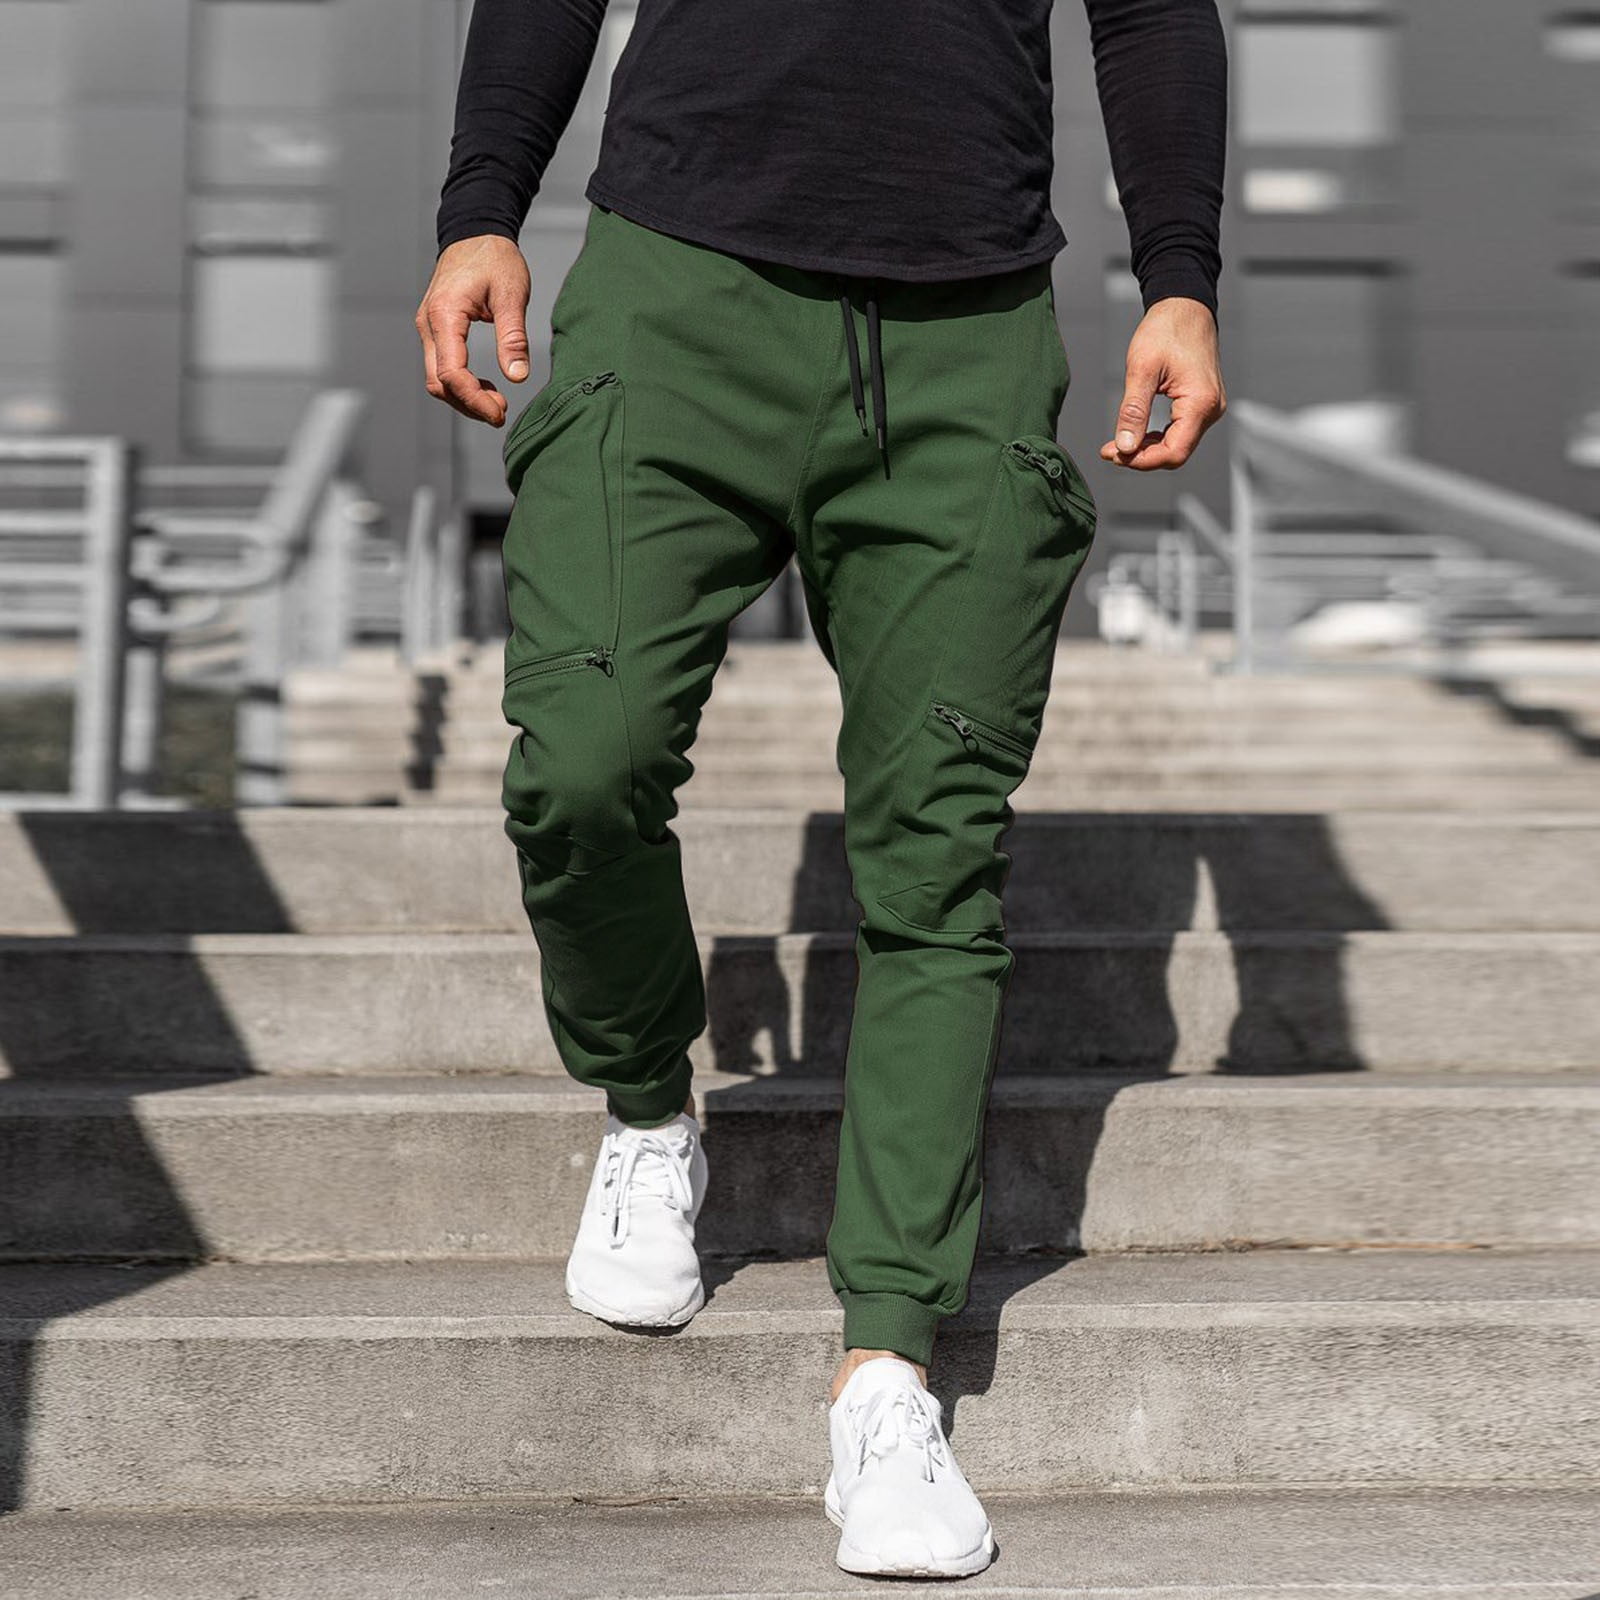 Vedolay Trousers For Men Mens Joggers Pants Trousers Multi Pockets  Sweatpants,Green XL